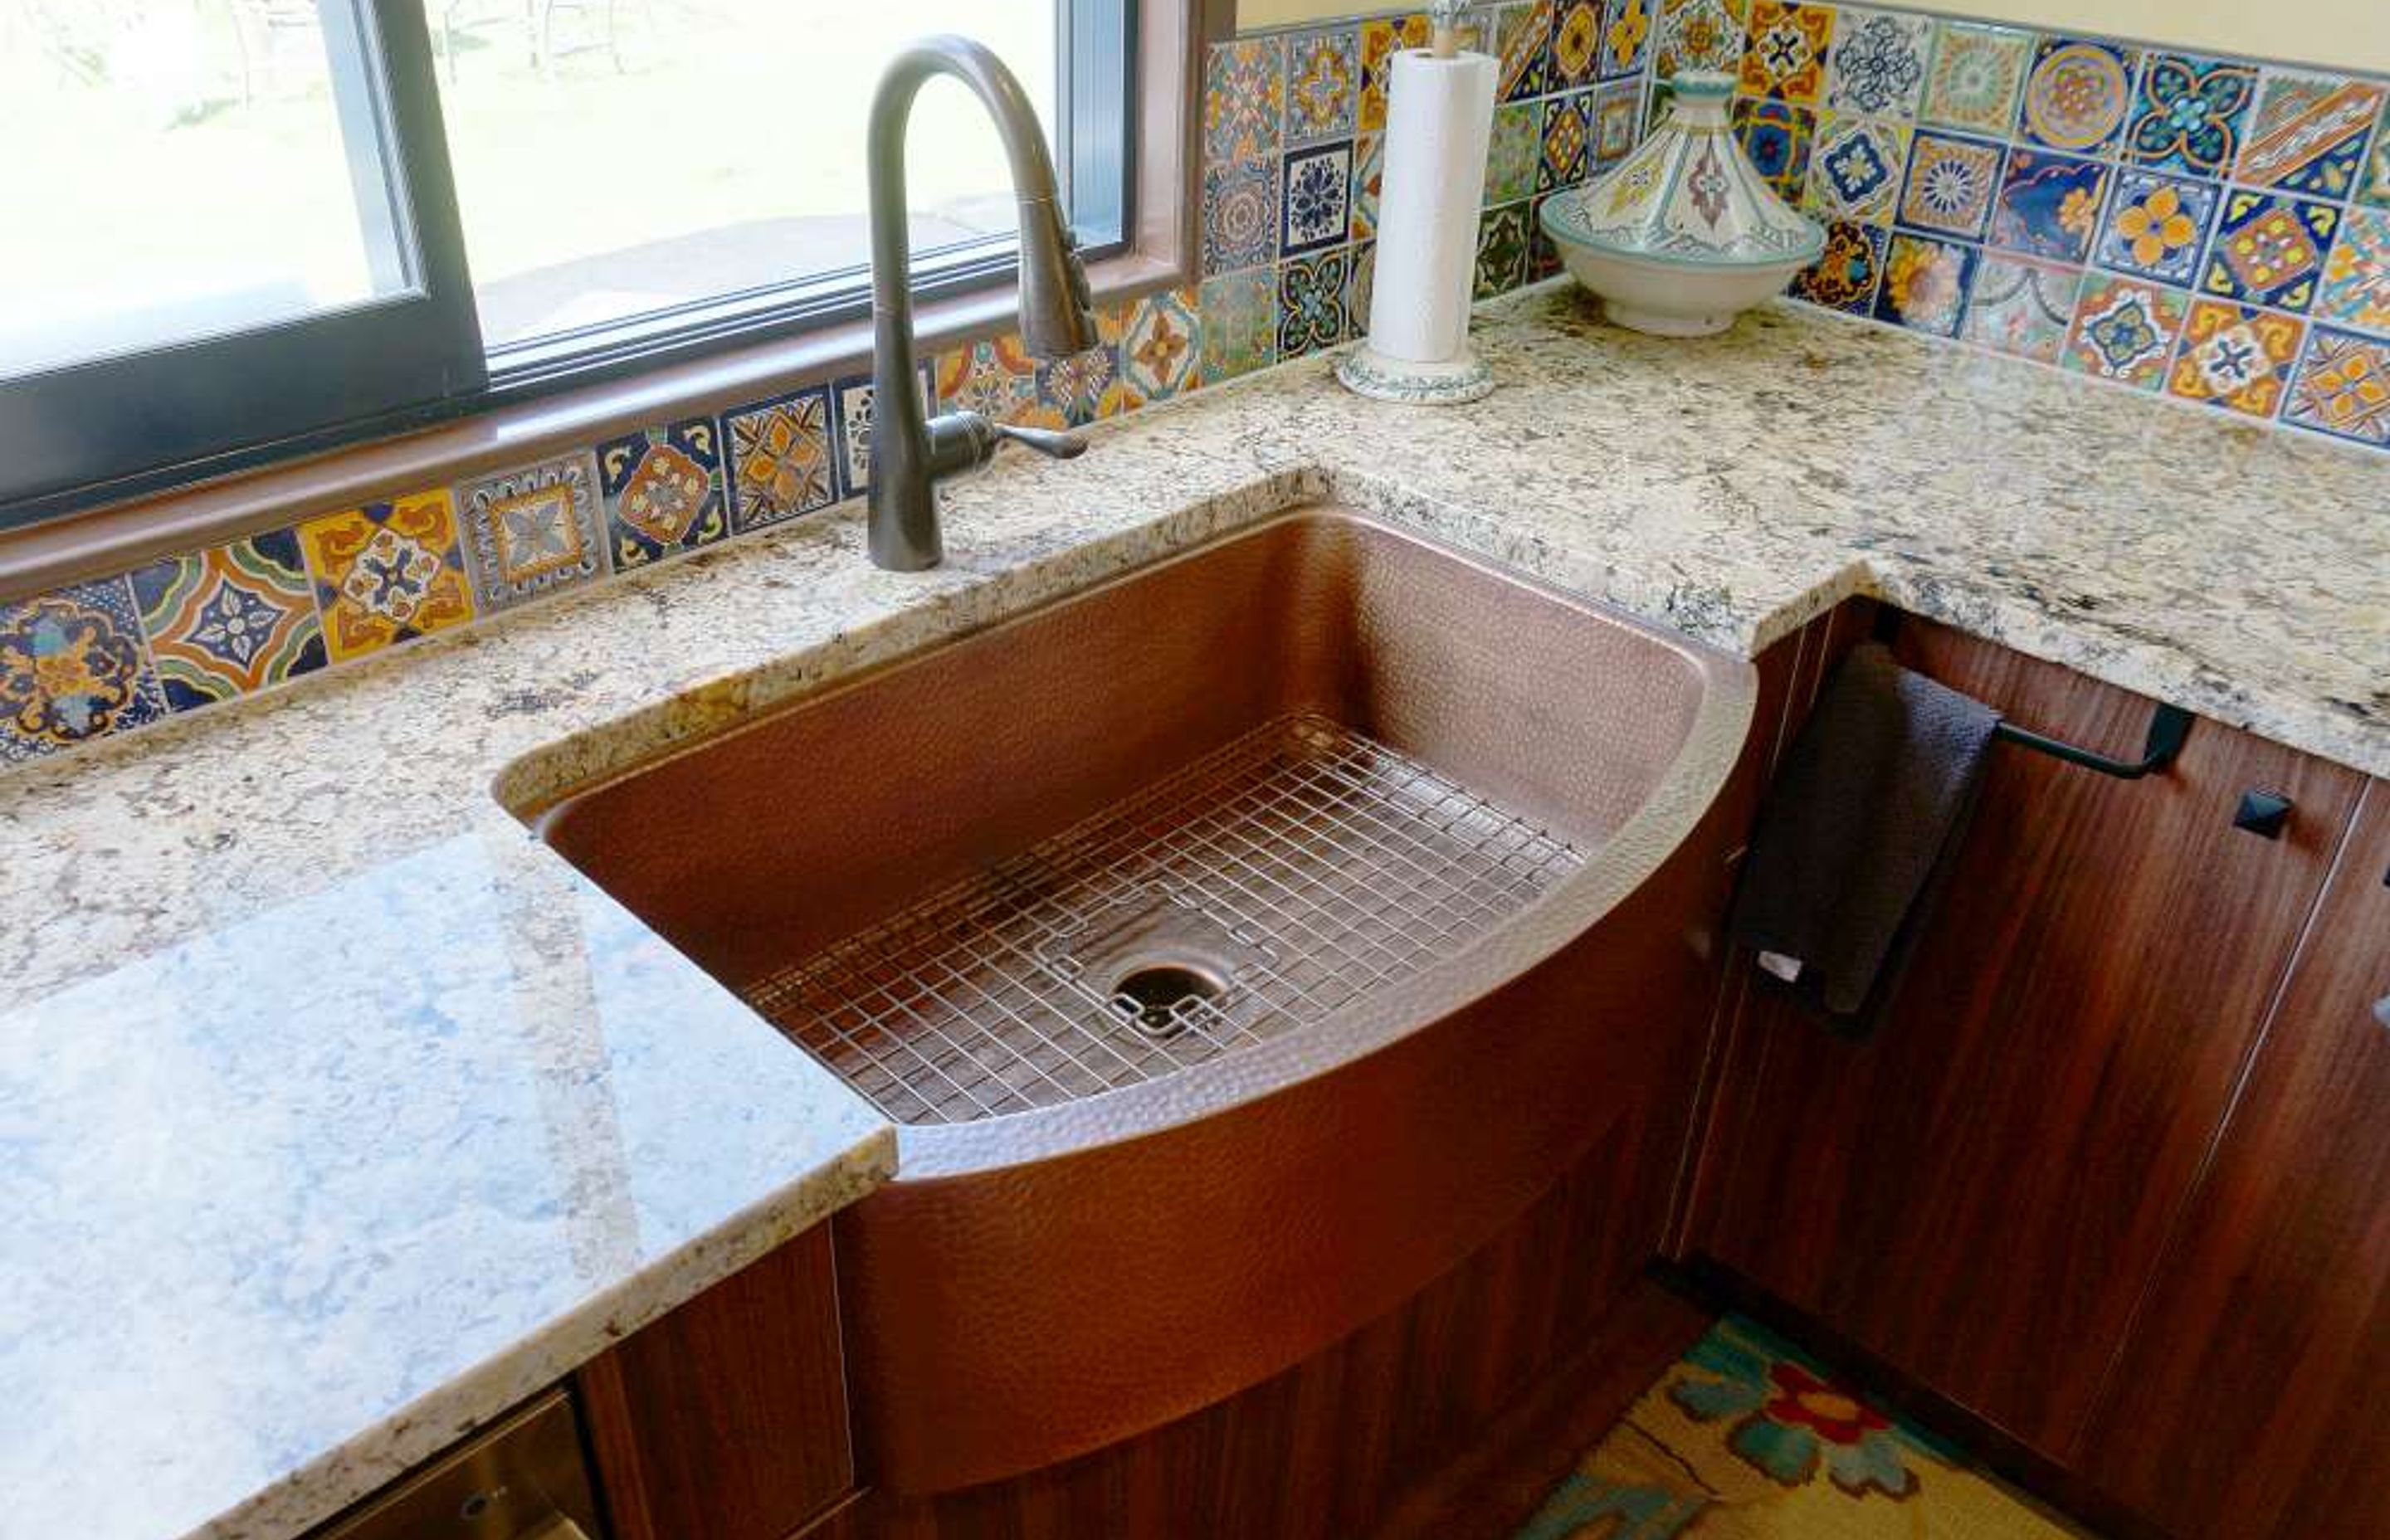 Brass sink and dull brass tap used to make the kitchen look rustic yet traditional